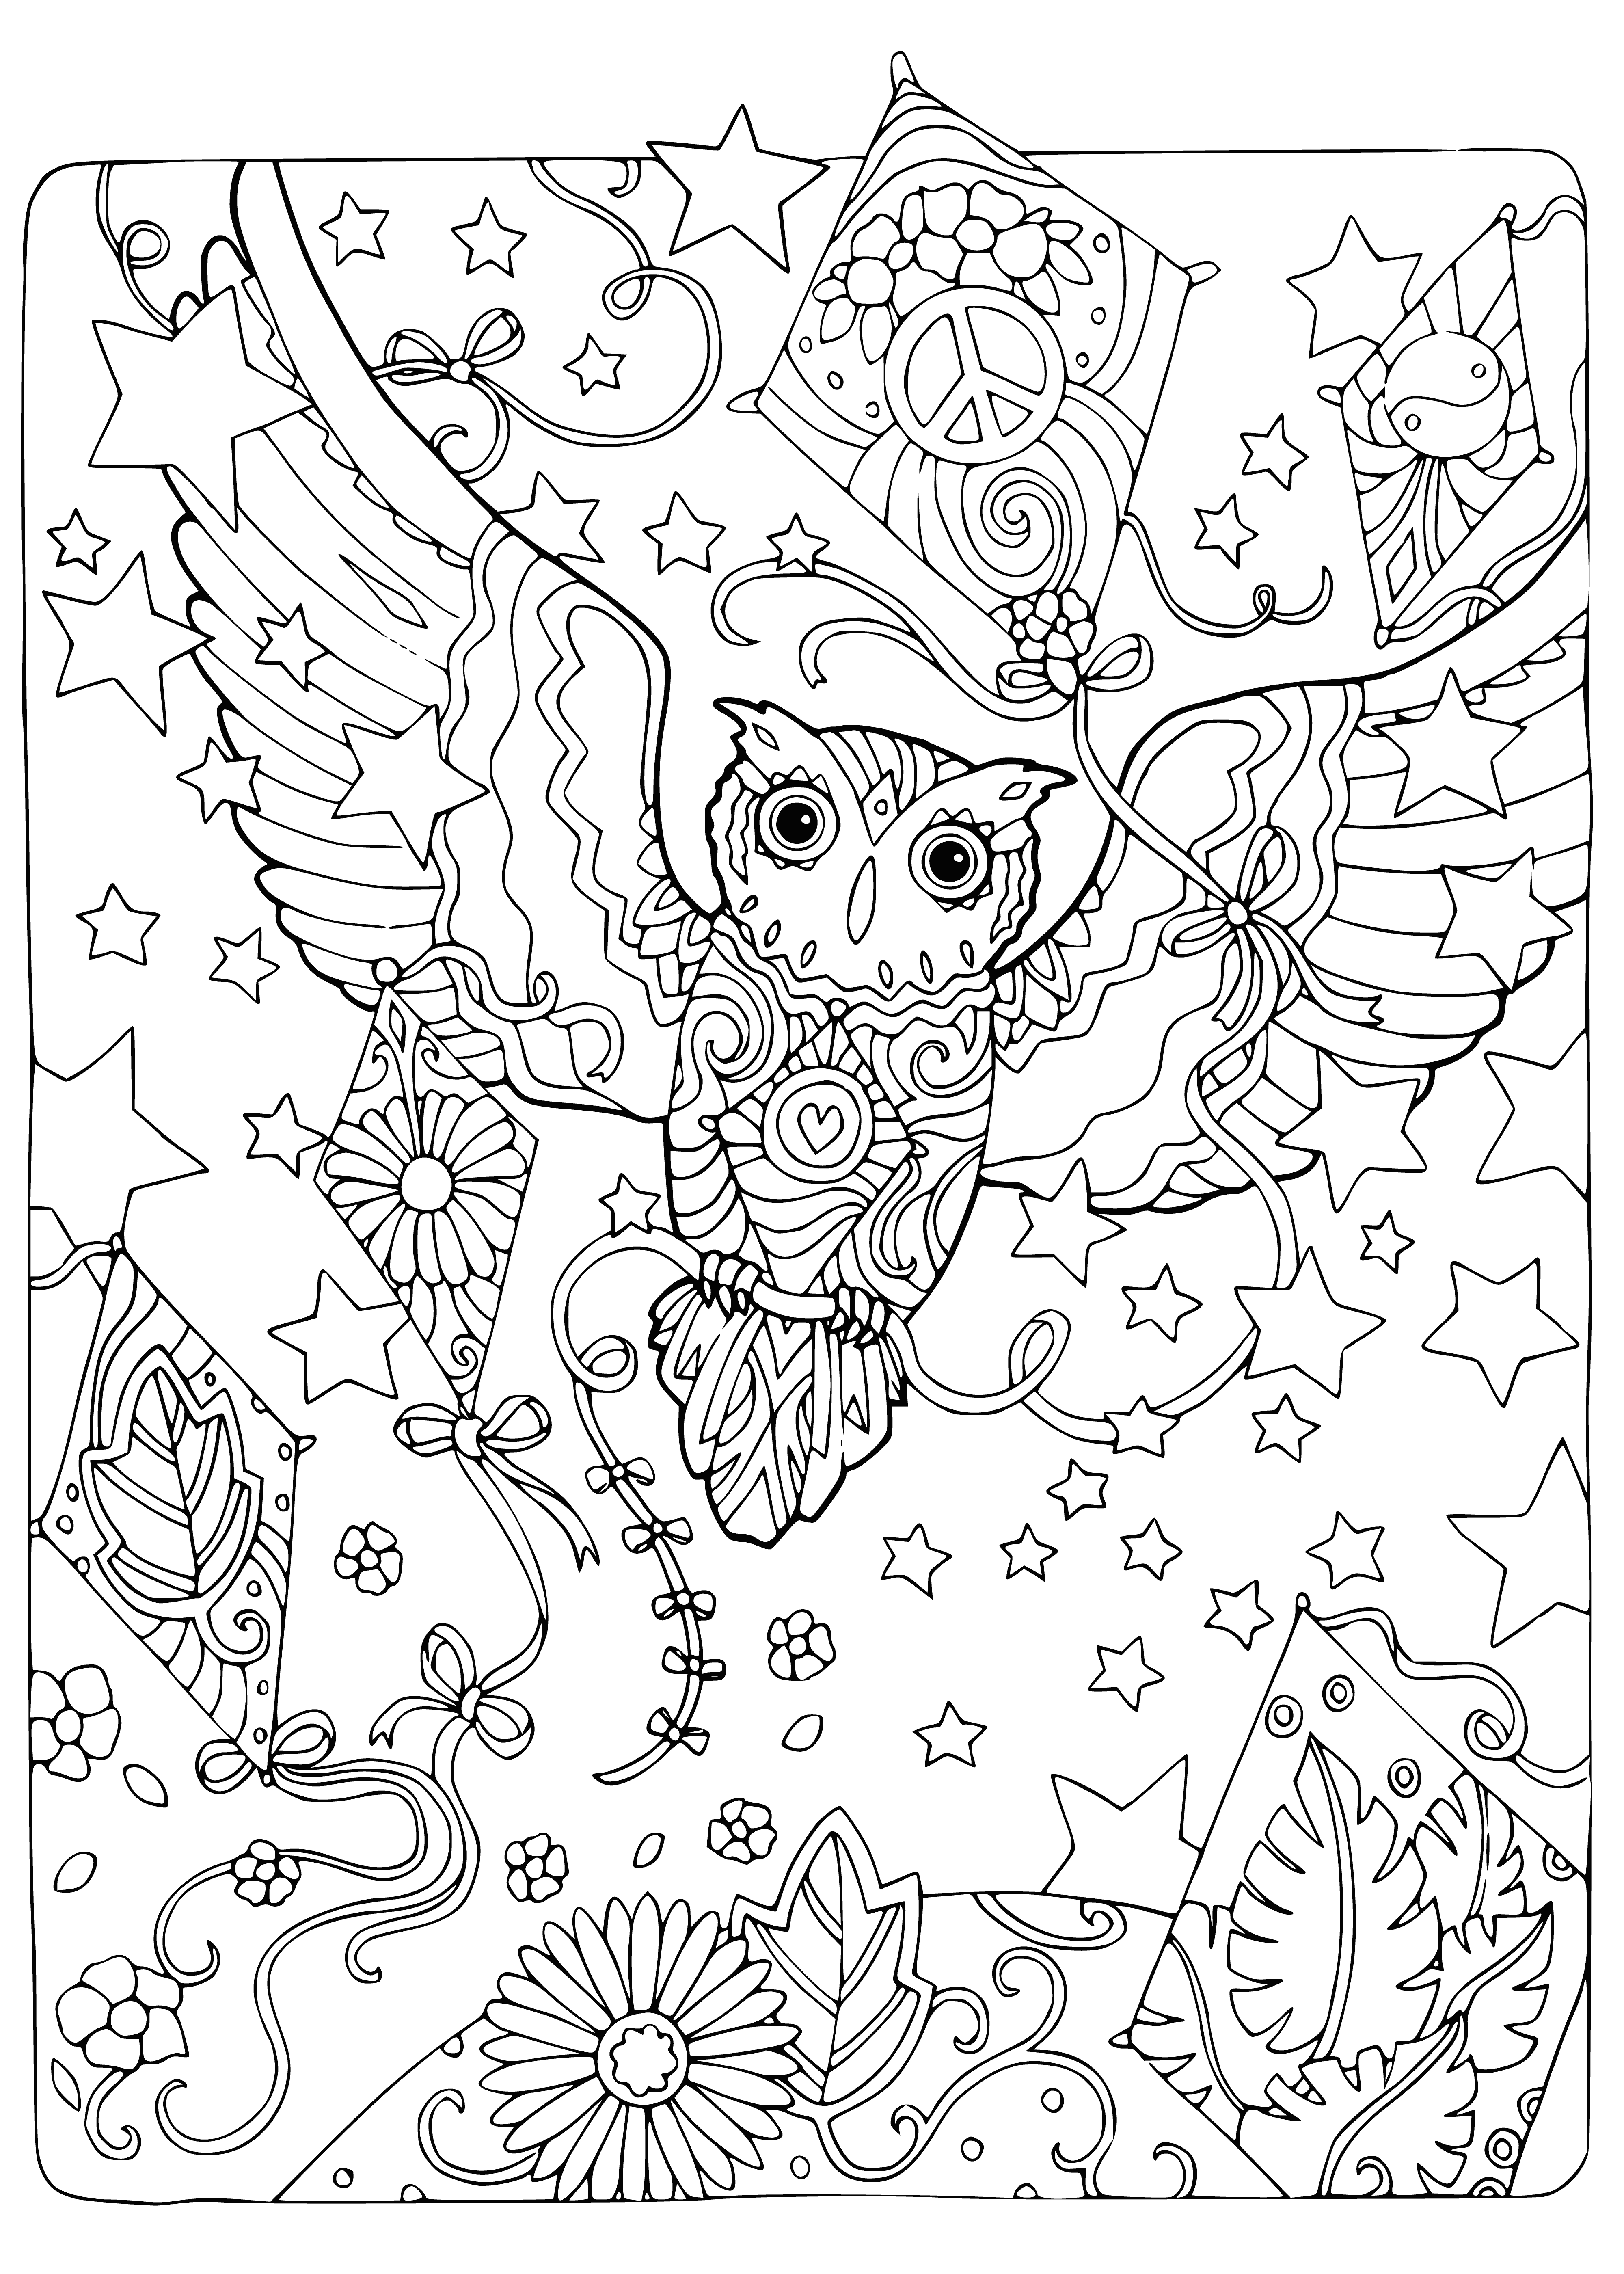 coloring page: Owls fly a kite high in the sky - orange with a yellow stripe - they hold & enjoy the string. #fun